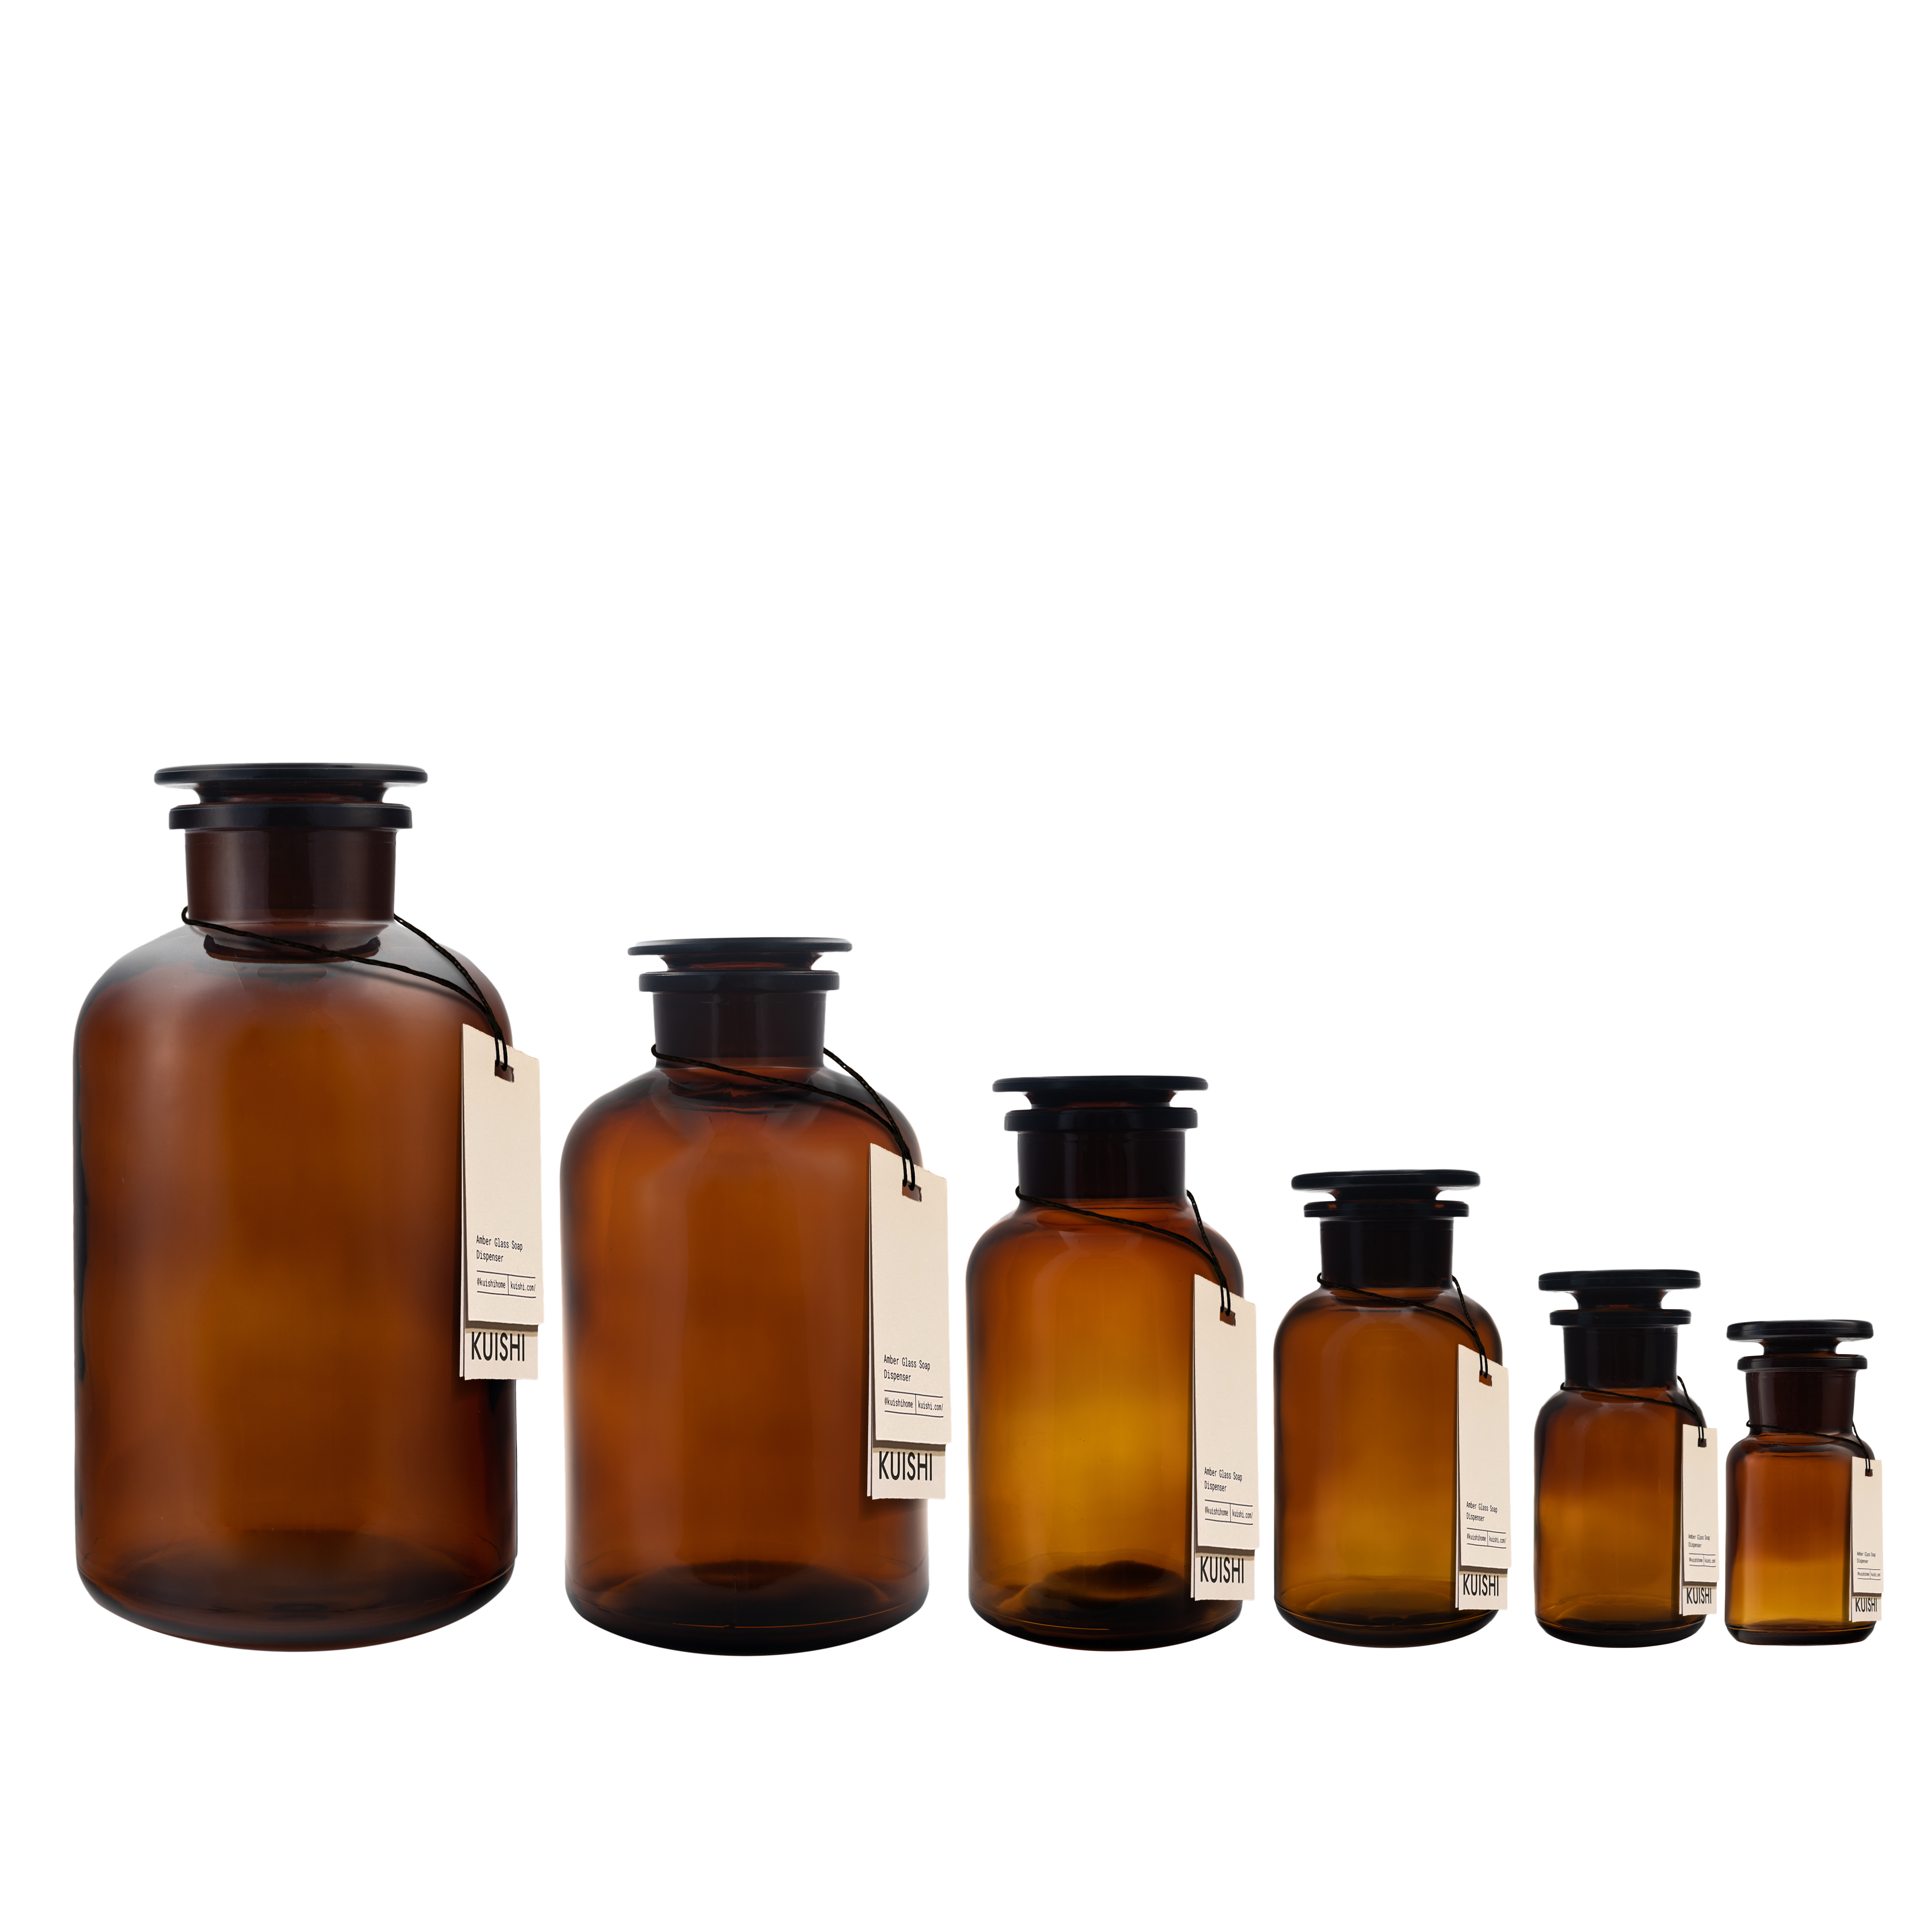 Amber Glass Apothecary Jars